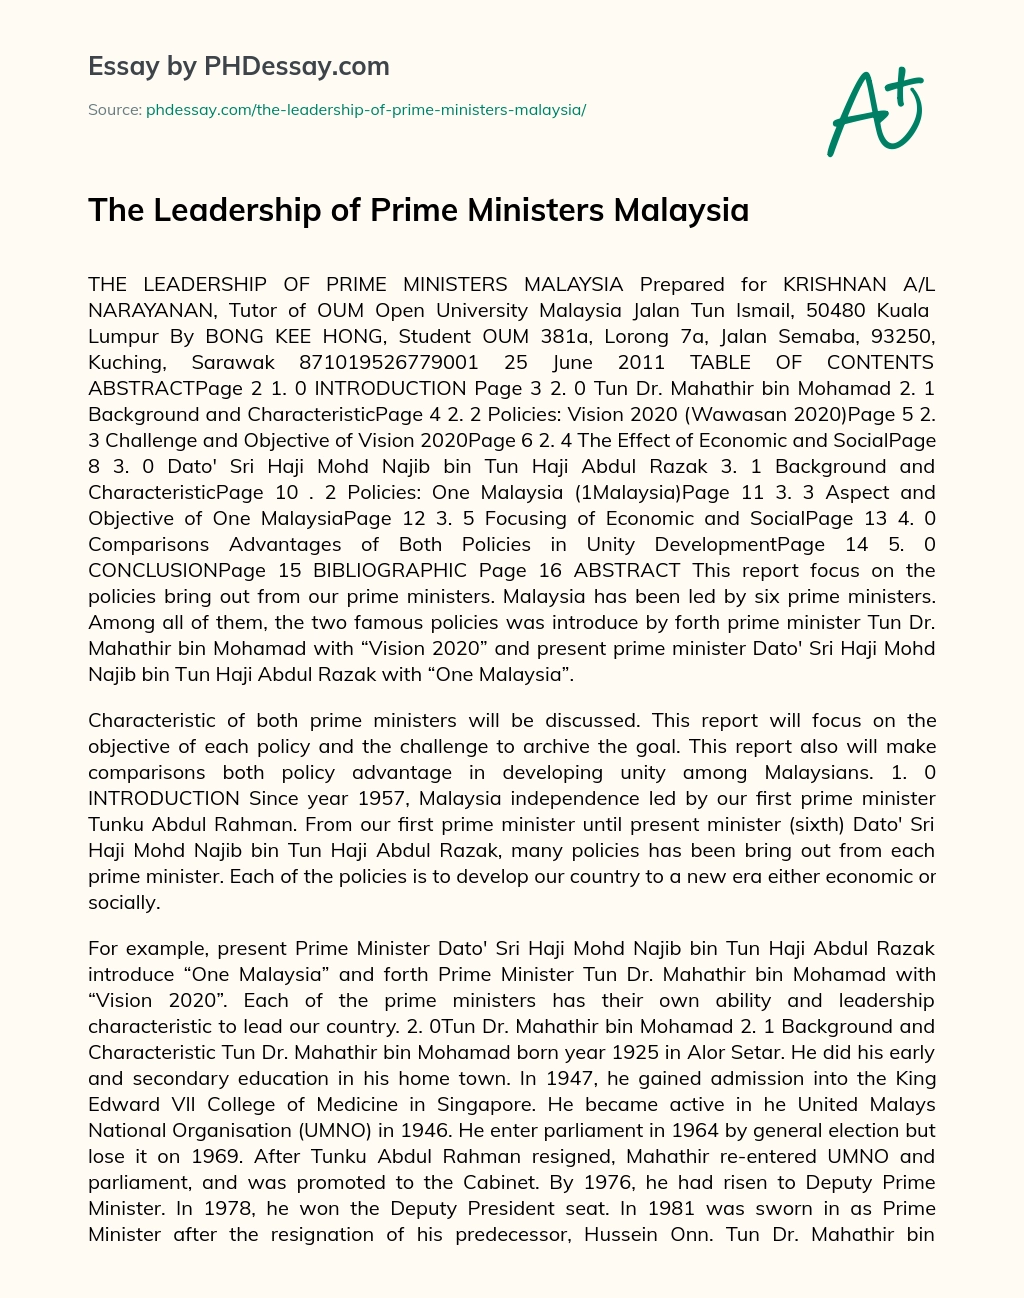 The Leadership of Prime Ministers Malaysia essay